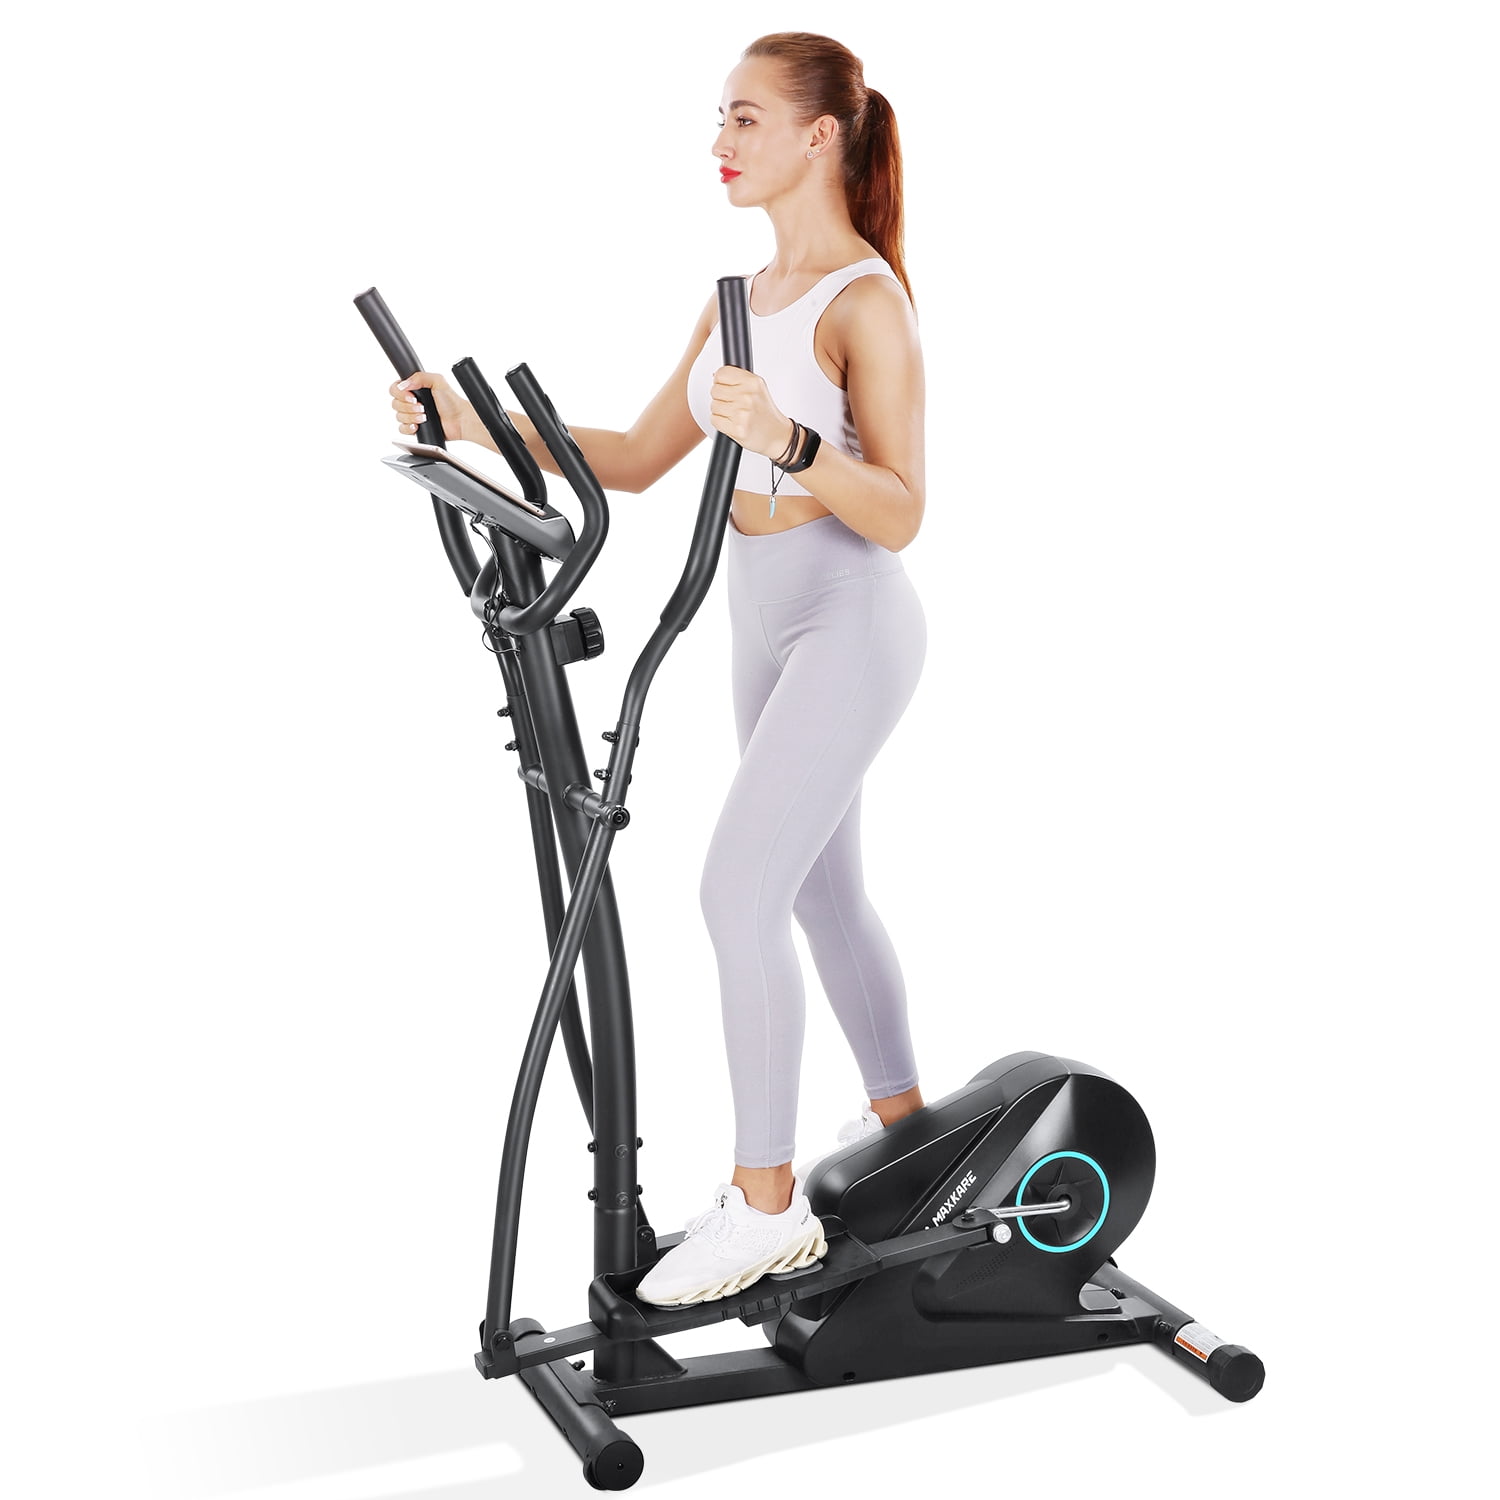 MaxKare Magnetic Elliptical Machine Elliptical Trainer Heavy Duty Smooth Quiet Driven  for Home Use with Front Flywheel/Display Panel/8-level Magnetic Resistance for Cardio Workout 